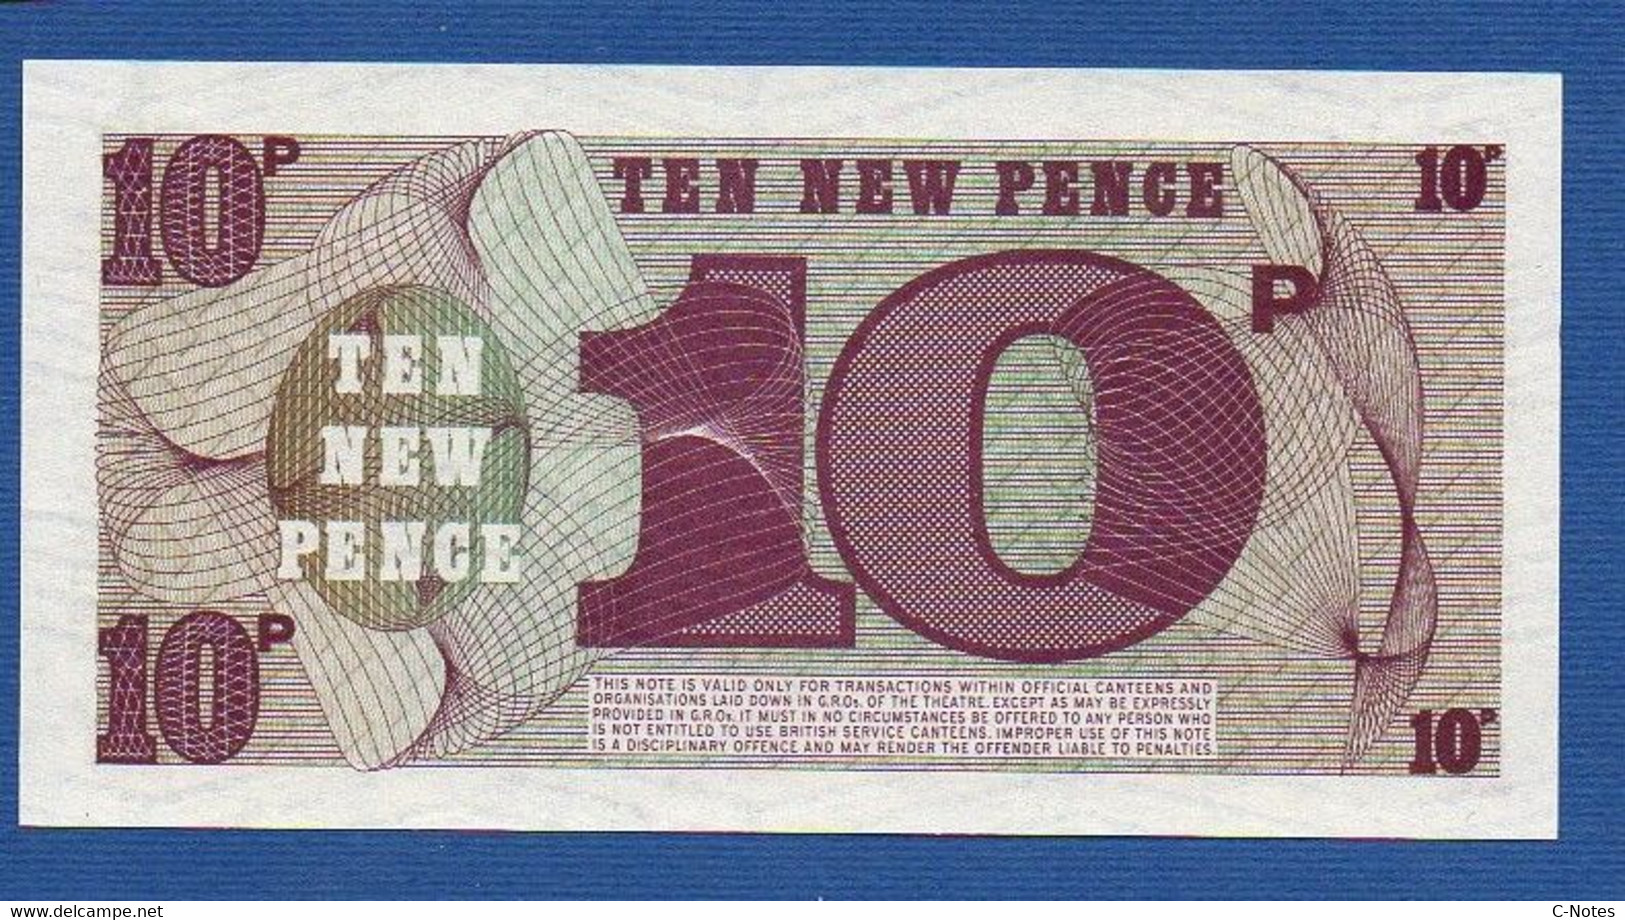 GREAT BRITAIN - P.M48 – 10 New Pence ND (1972) UNC, Serie A/2 561431, Printer Bradbury Wilkinson, New Malden - British Armed Forces & Special Vouchers